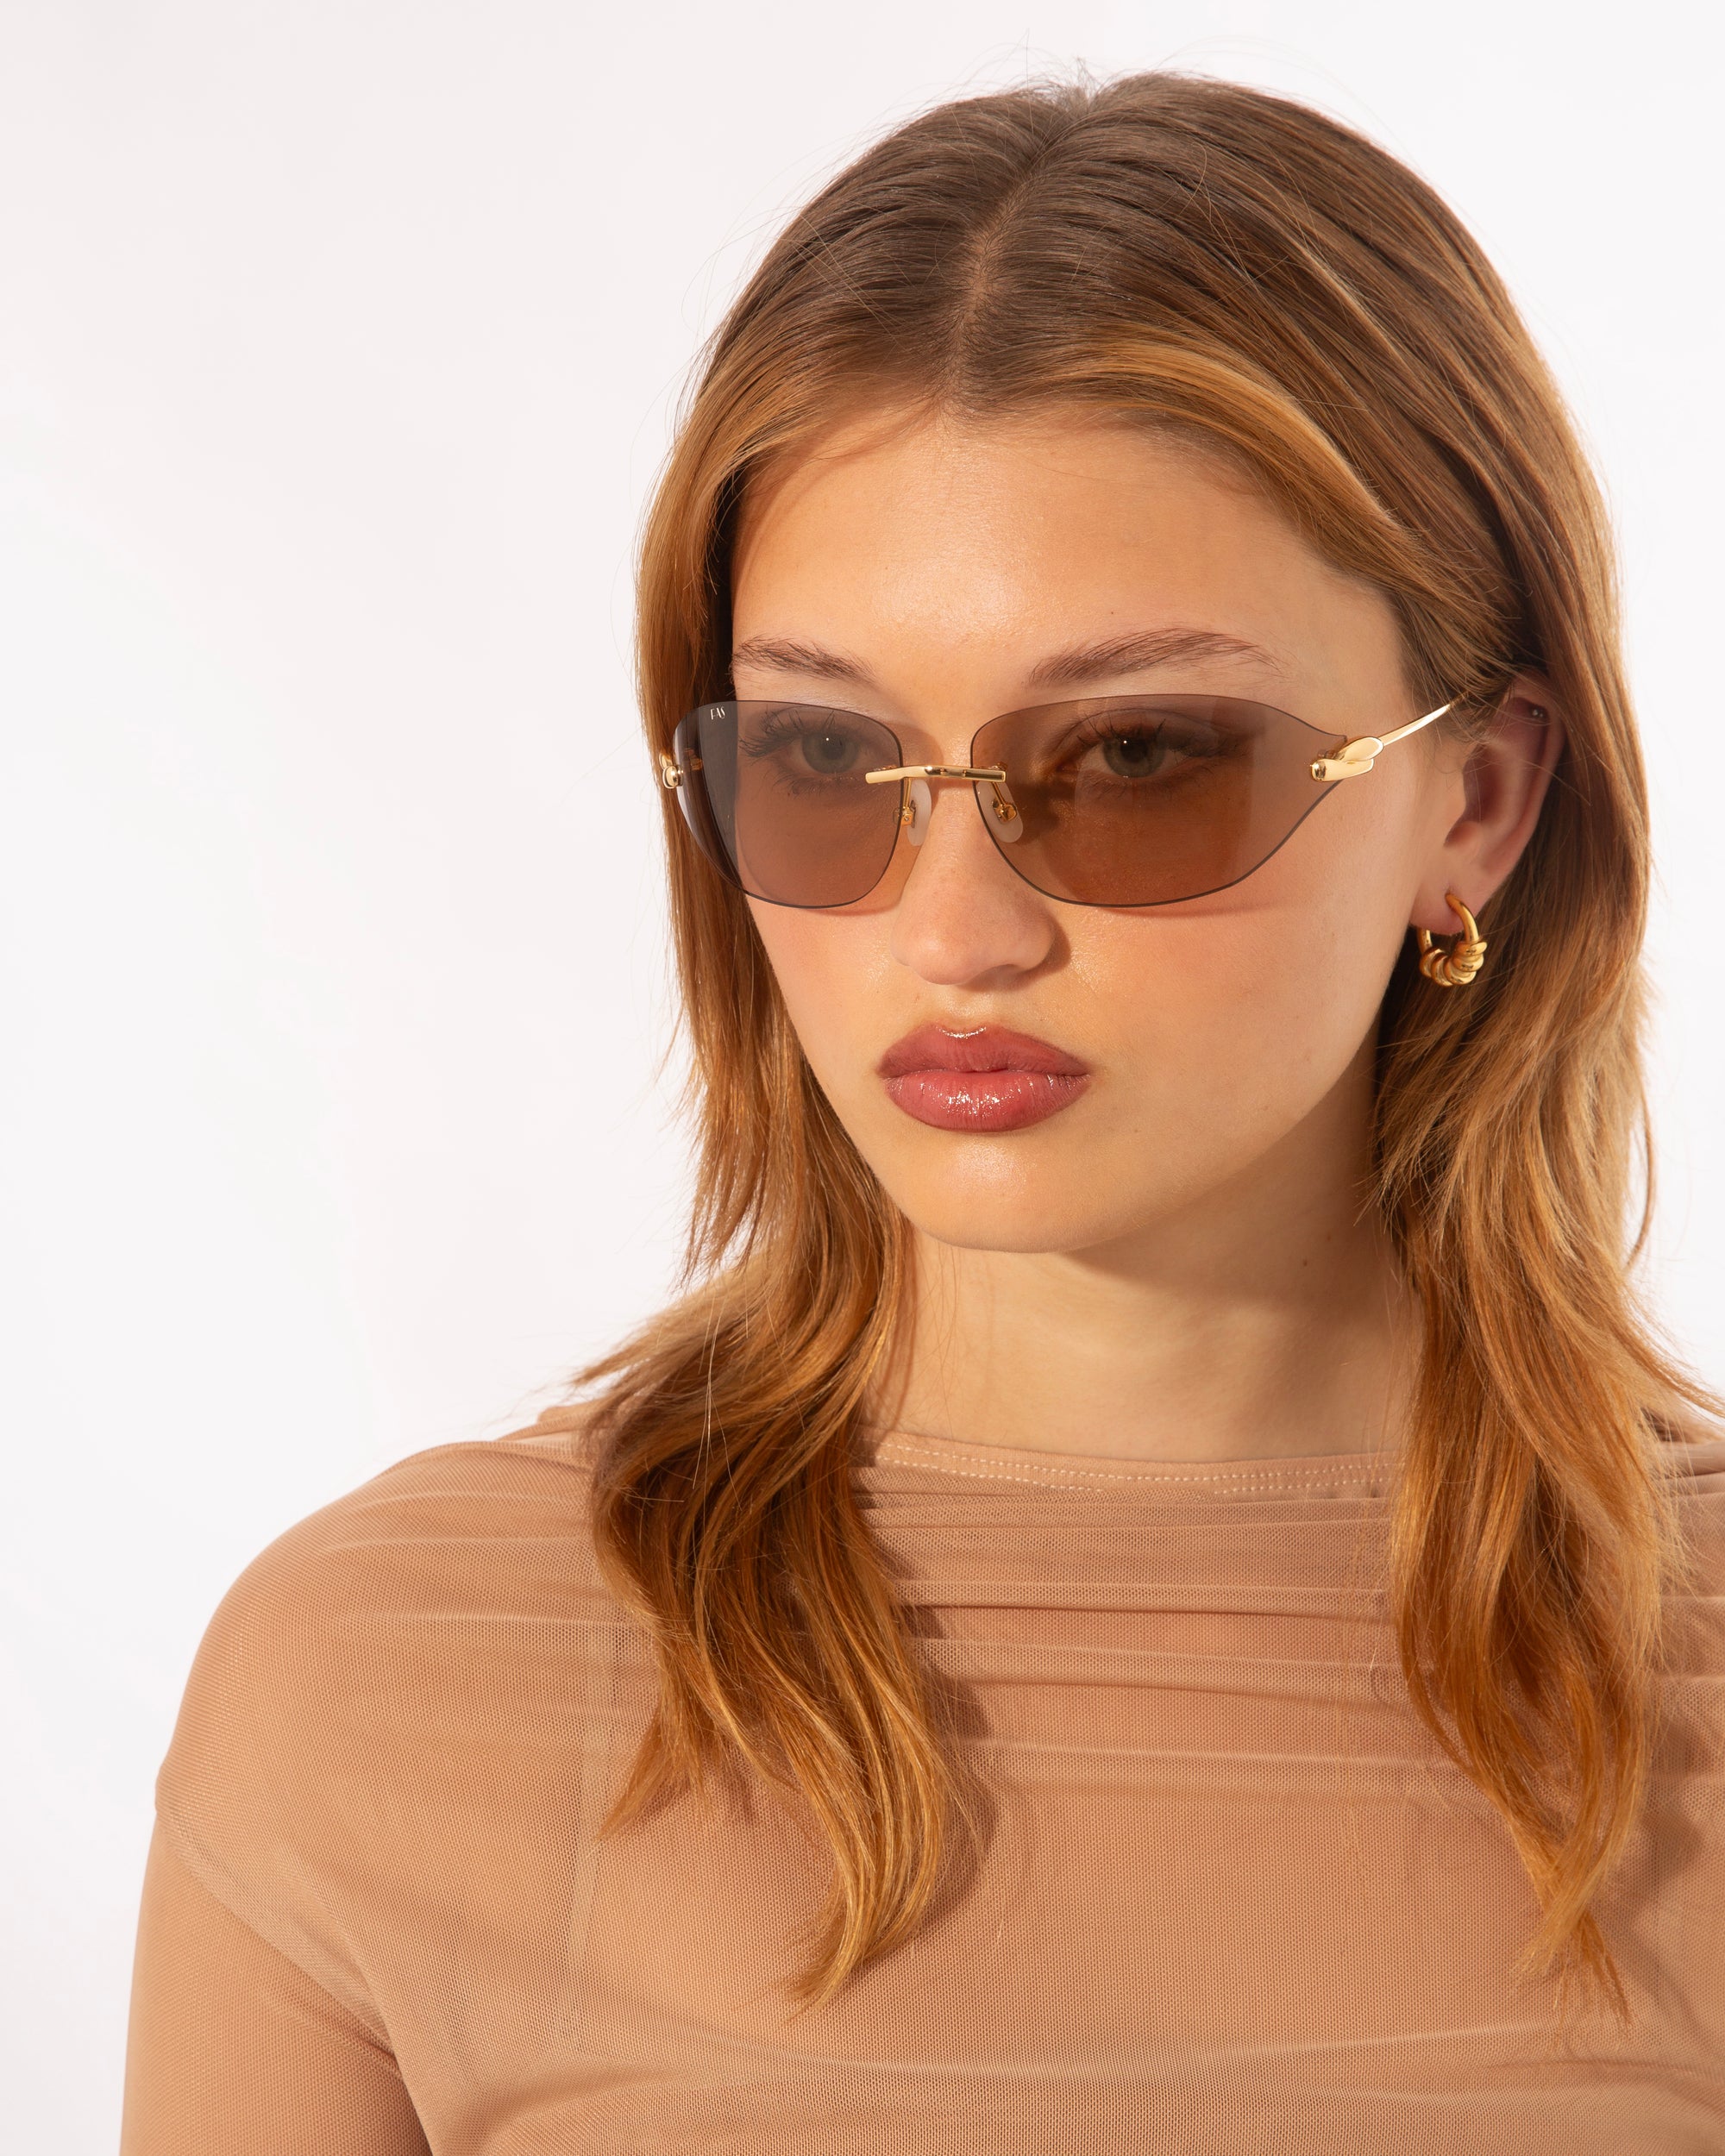 A person with long brown hair wearing For Art&#39;s Sake® Serpent I sunglasses and gold hoop earrings. They are dressed in a translucent beige top and look slightly to the side against a plain white background.